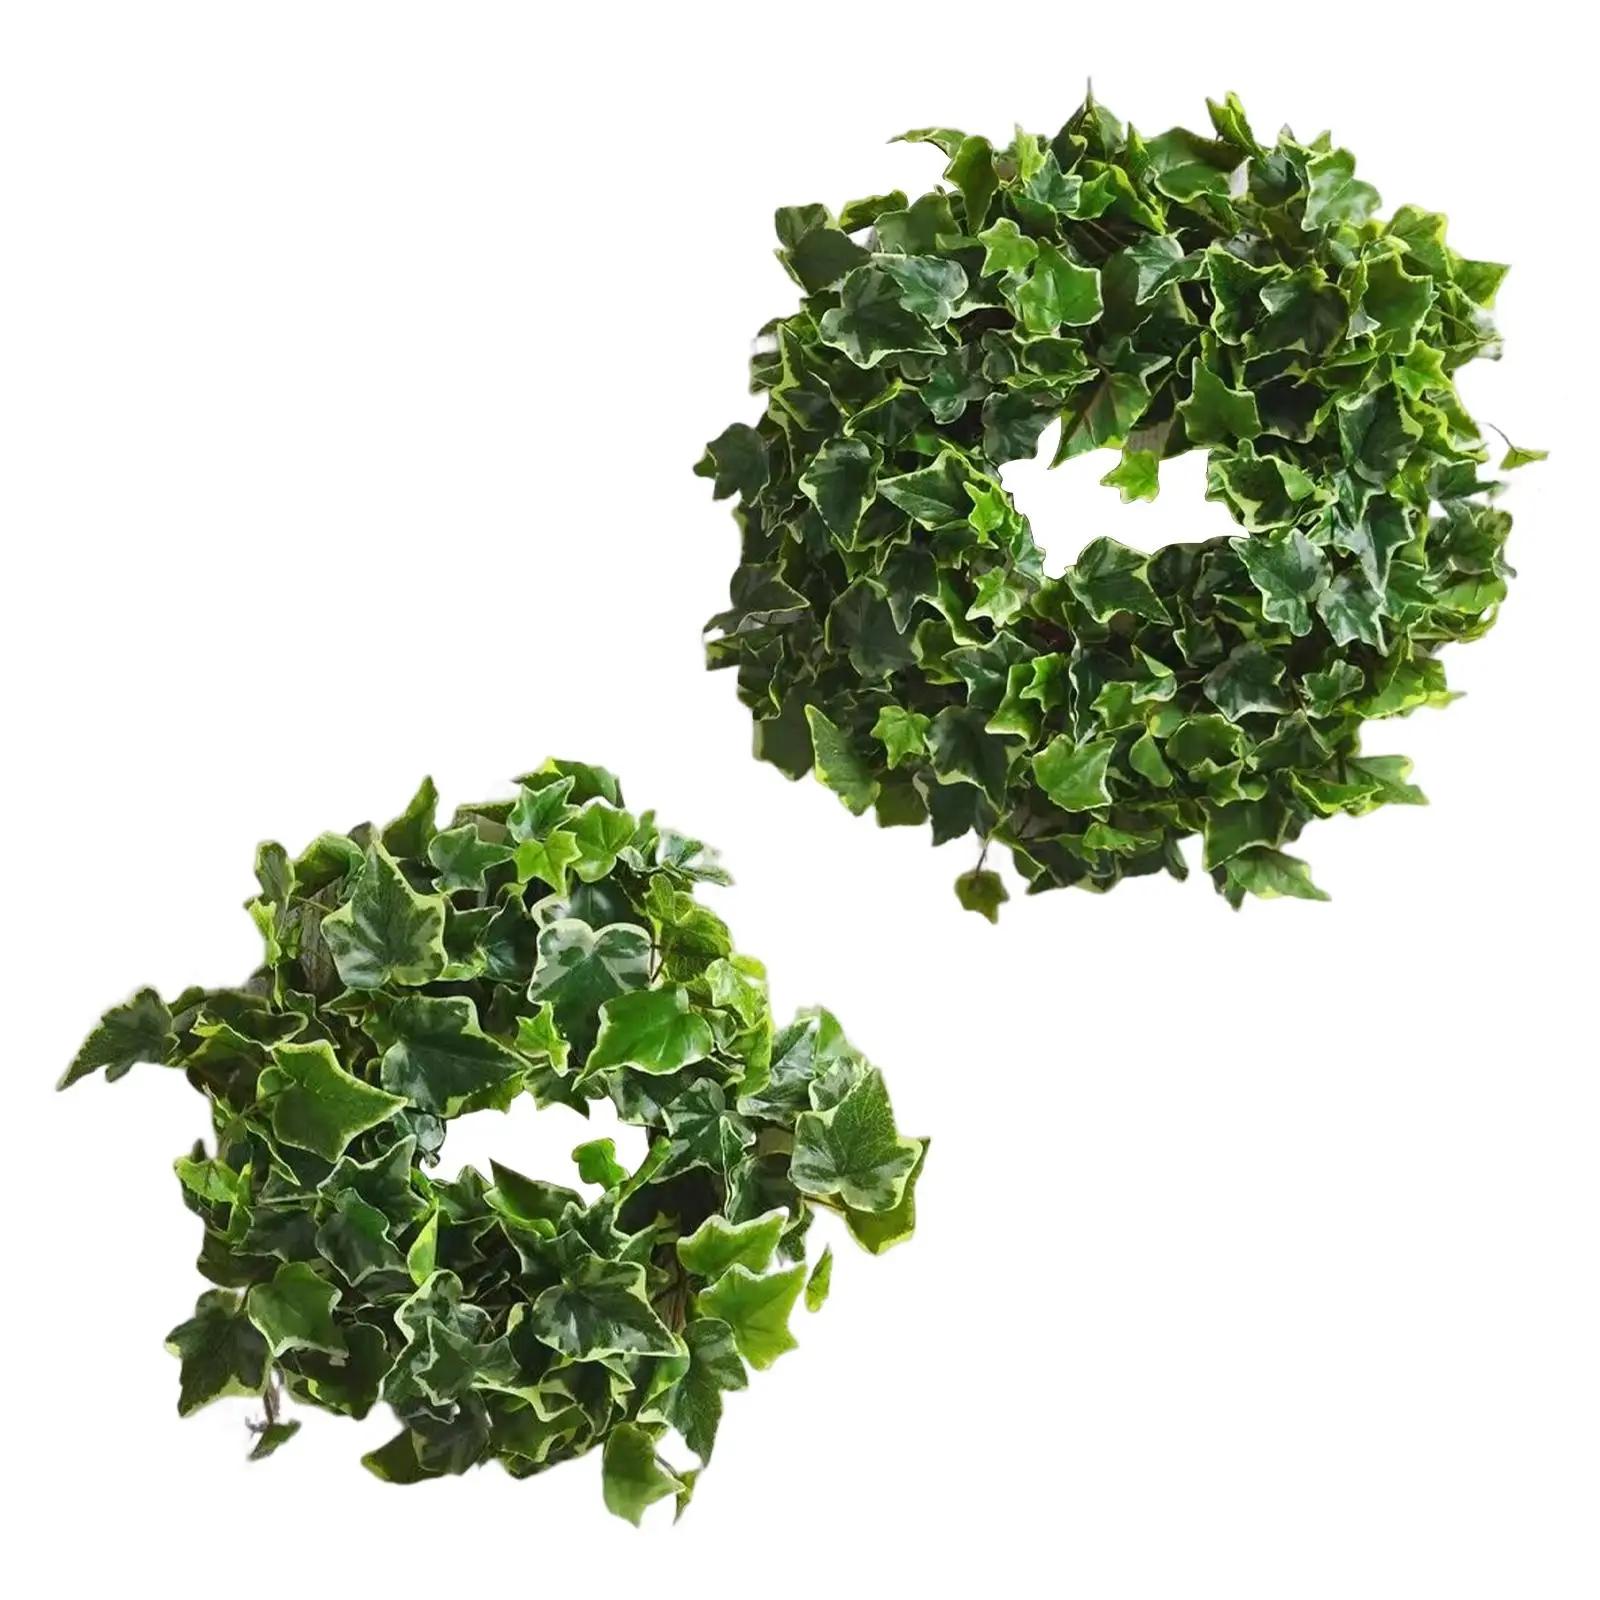 Spring Wreath Artificial Leaves Wall Wreath Seasons Wreath Decorative for